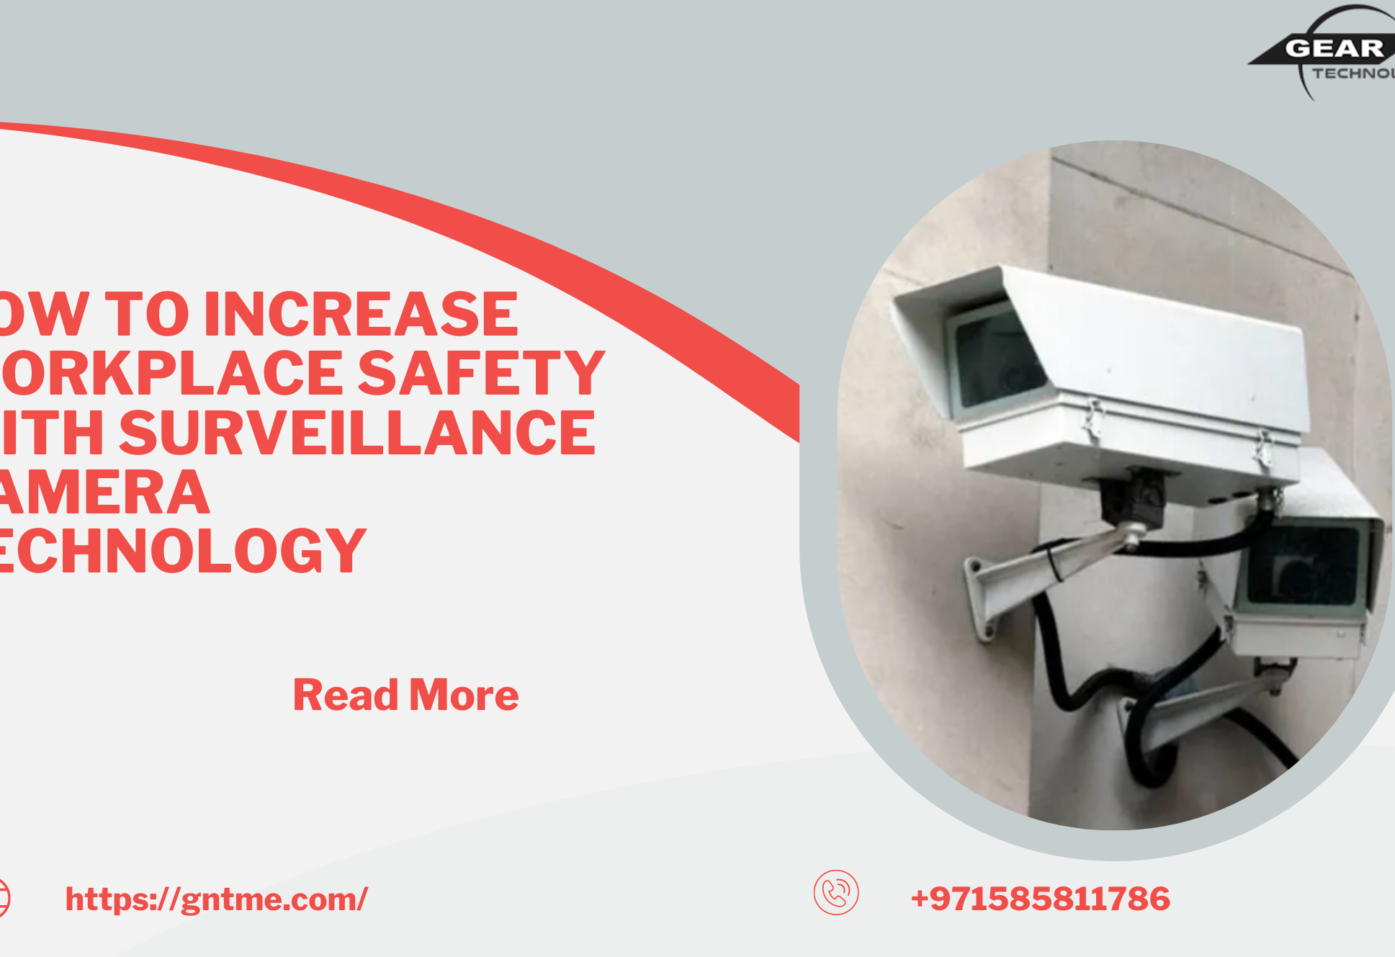 How to Increase Workplace Safety with Surveillance Camera Technology Gear Net Technologies LLC